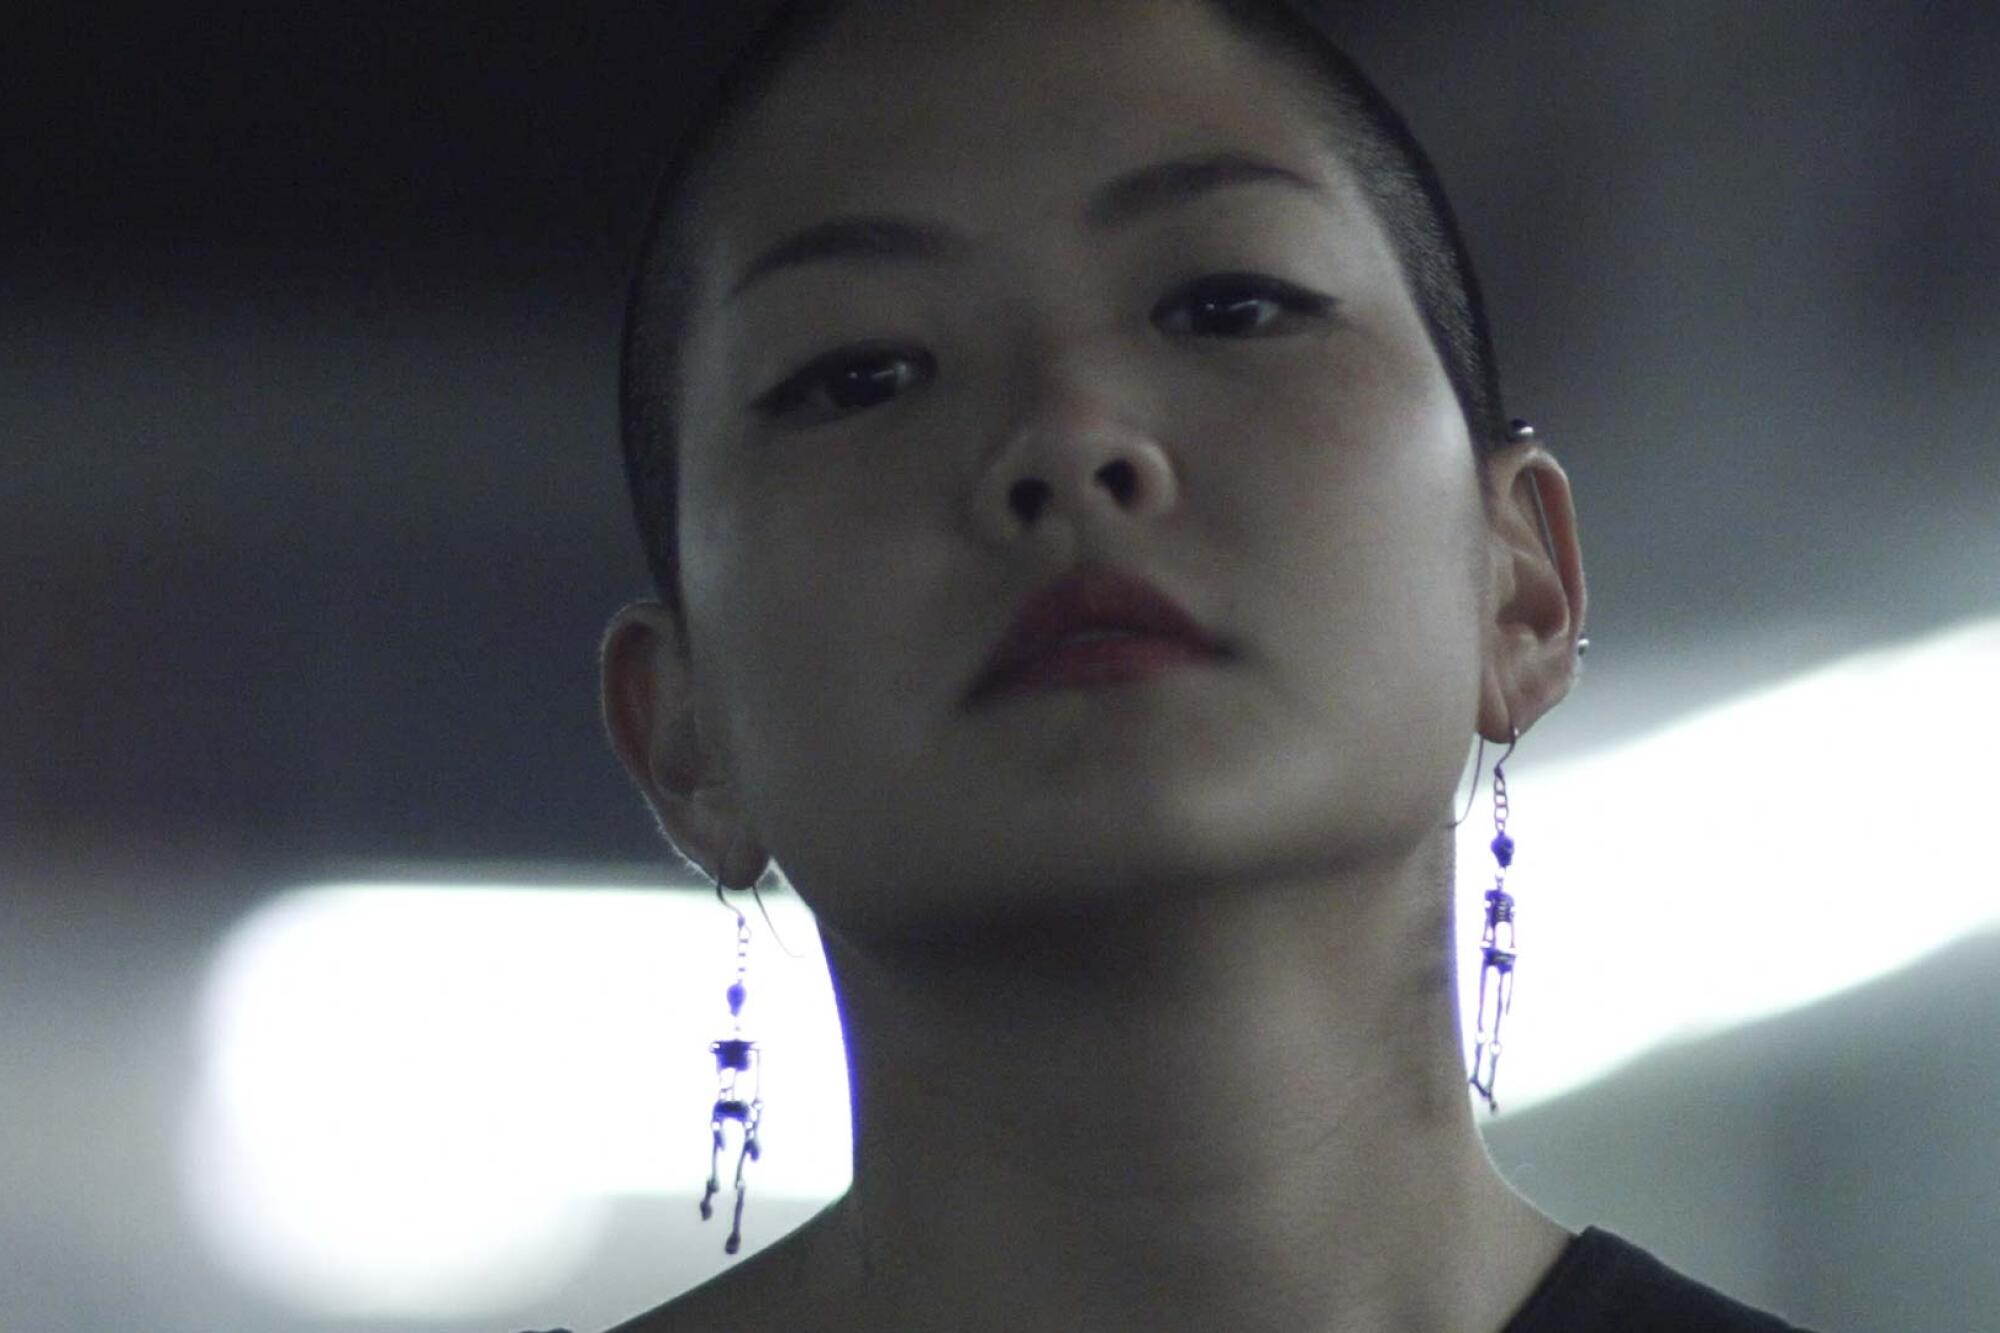 Kyoko Takenaka, in the short film "Home," looks directly into the camera.